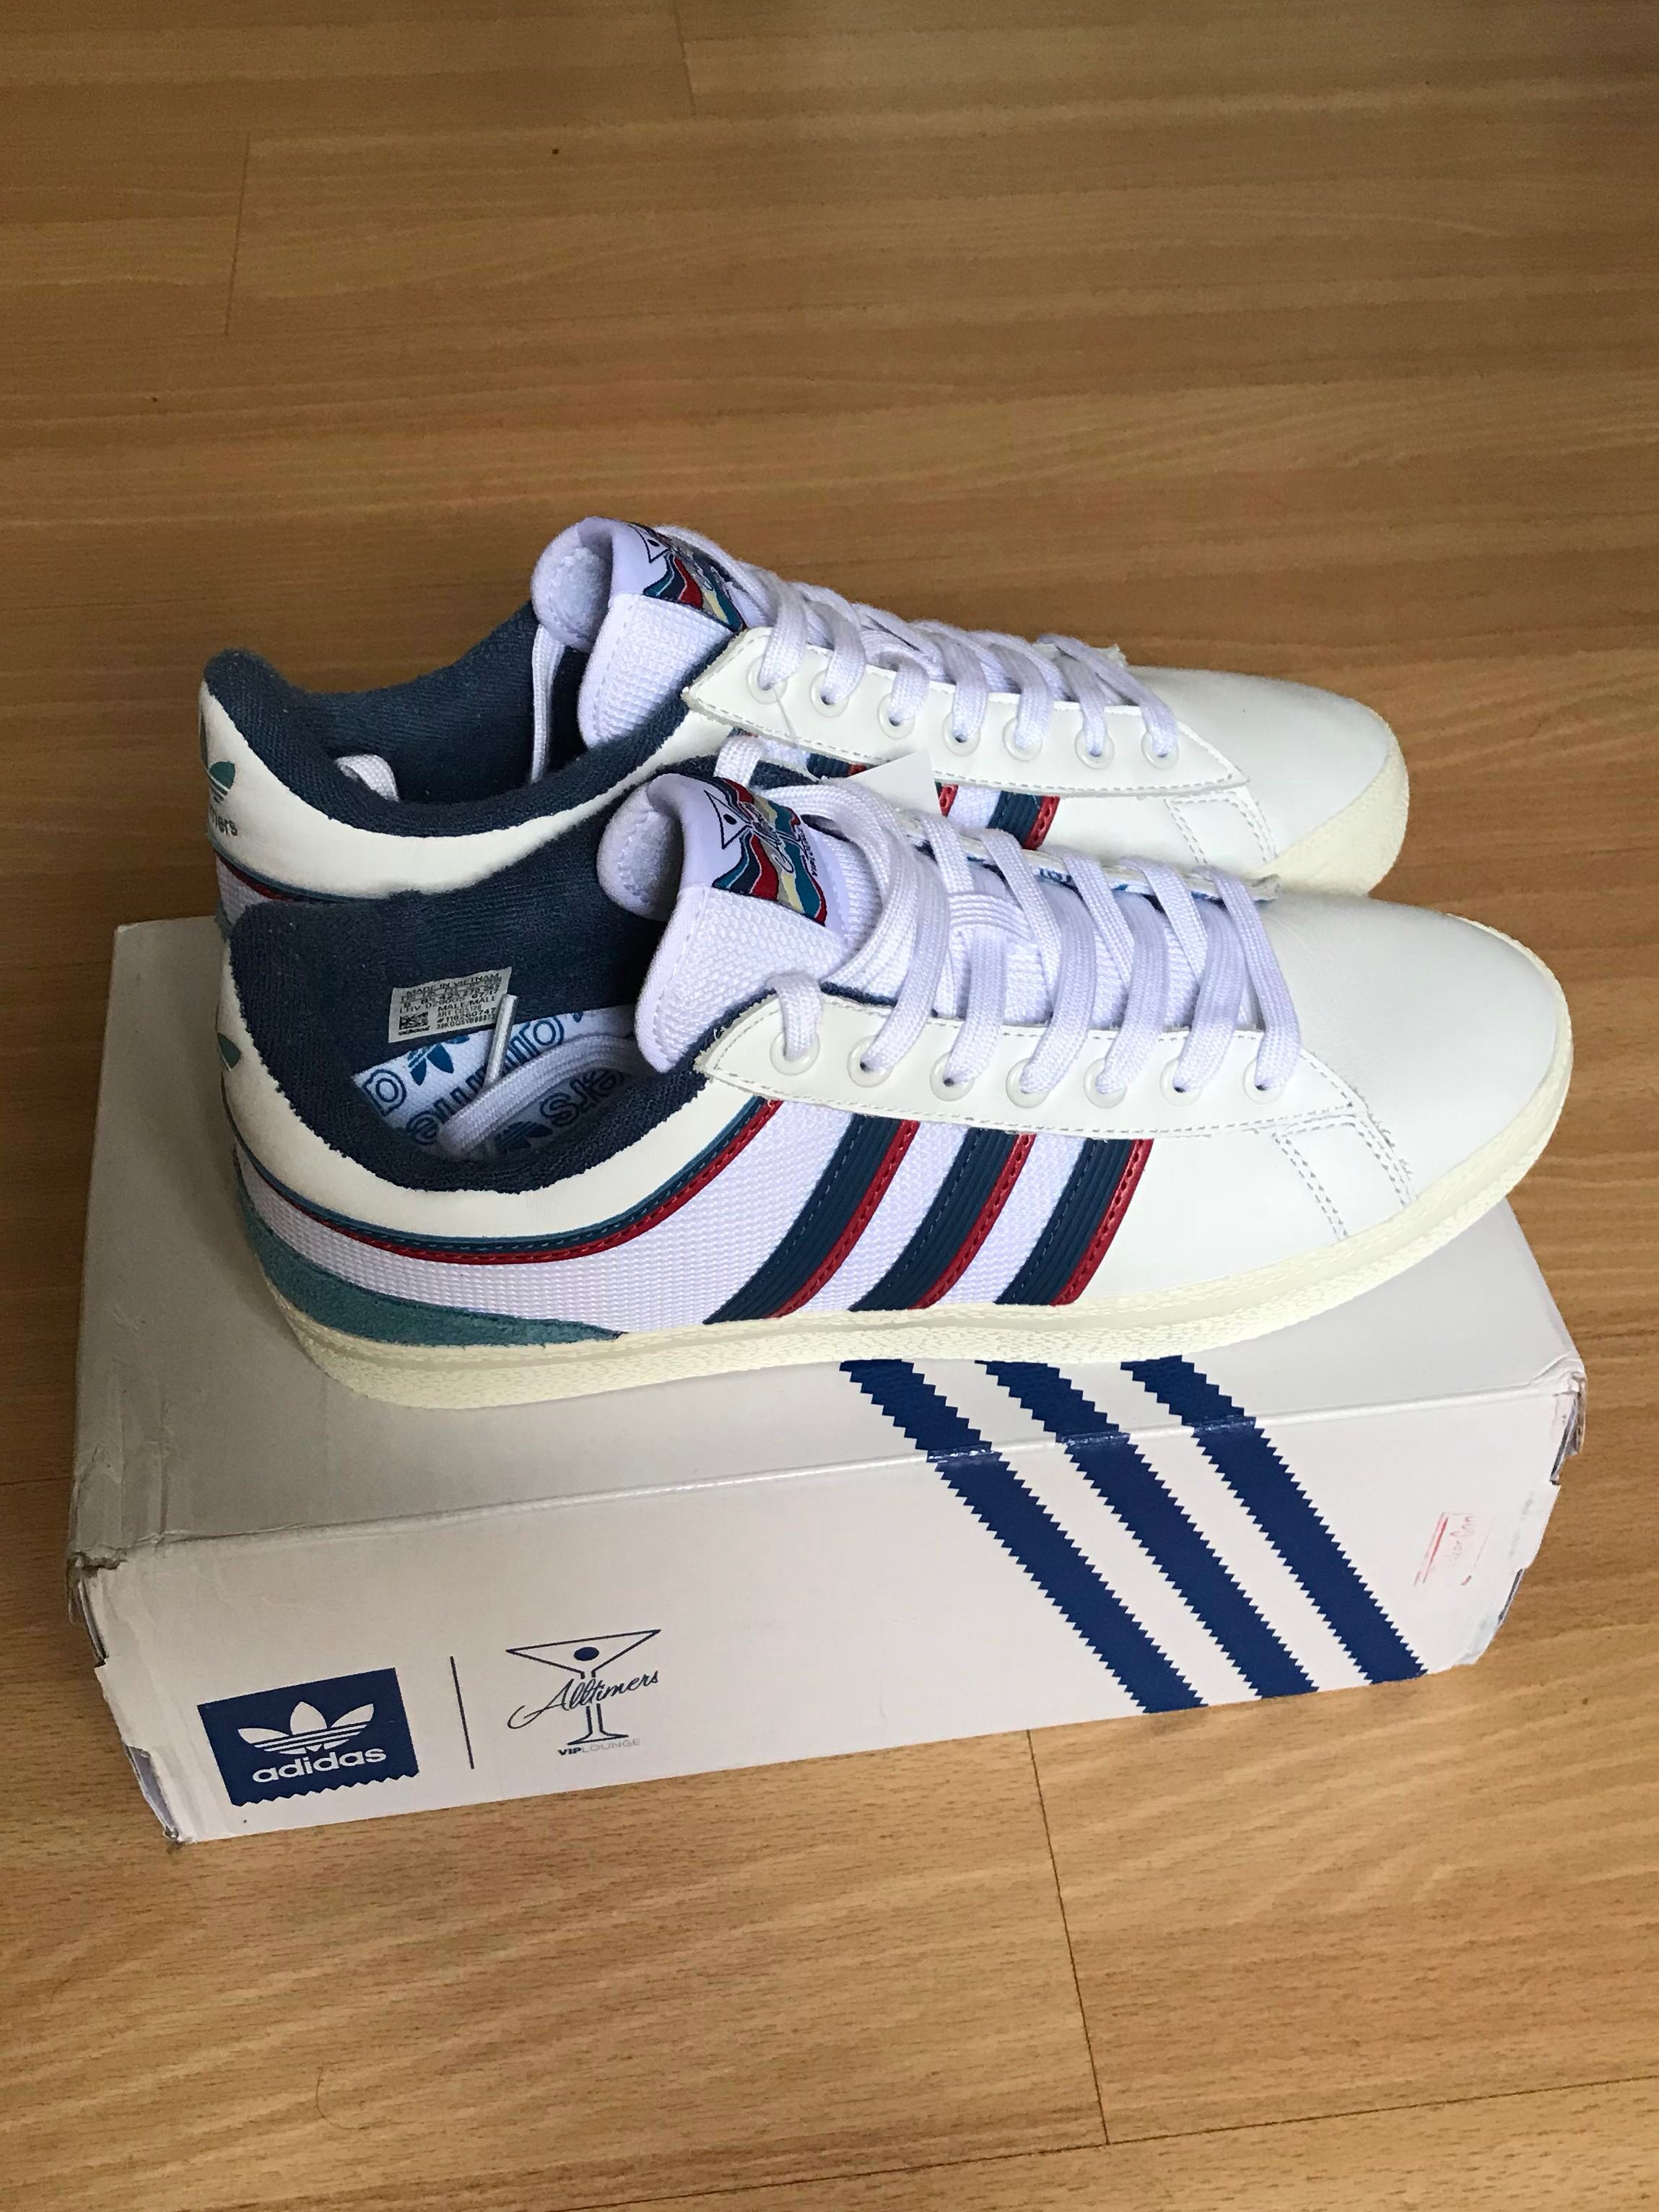 Adidas campus vulc alltimers, Men's Fashion, Footwear, Sneakers on Carousell